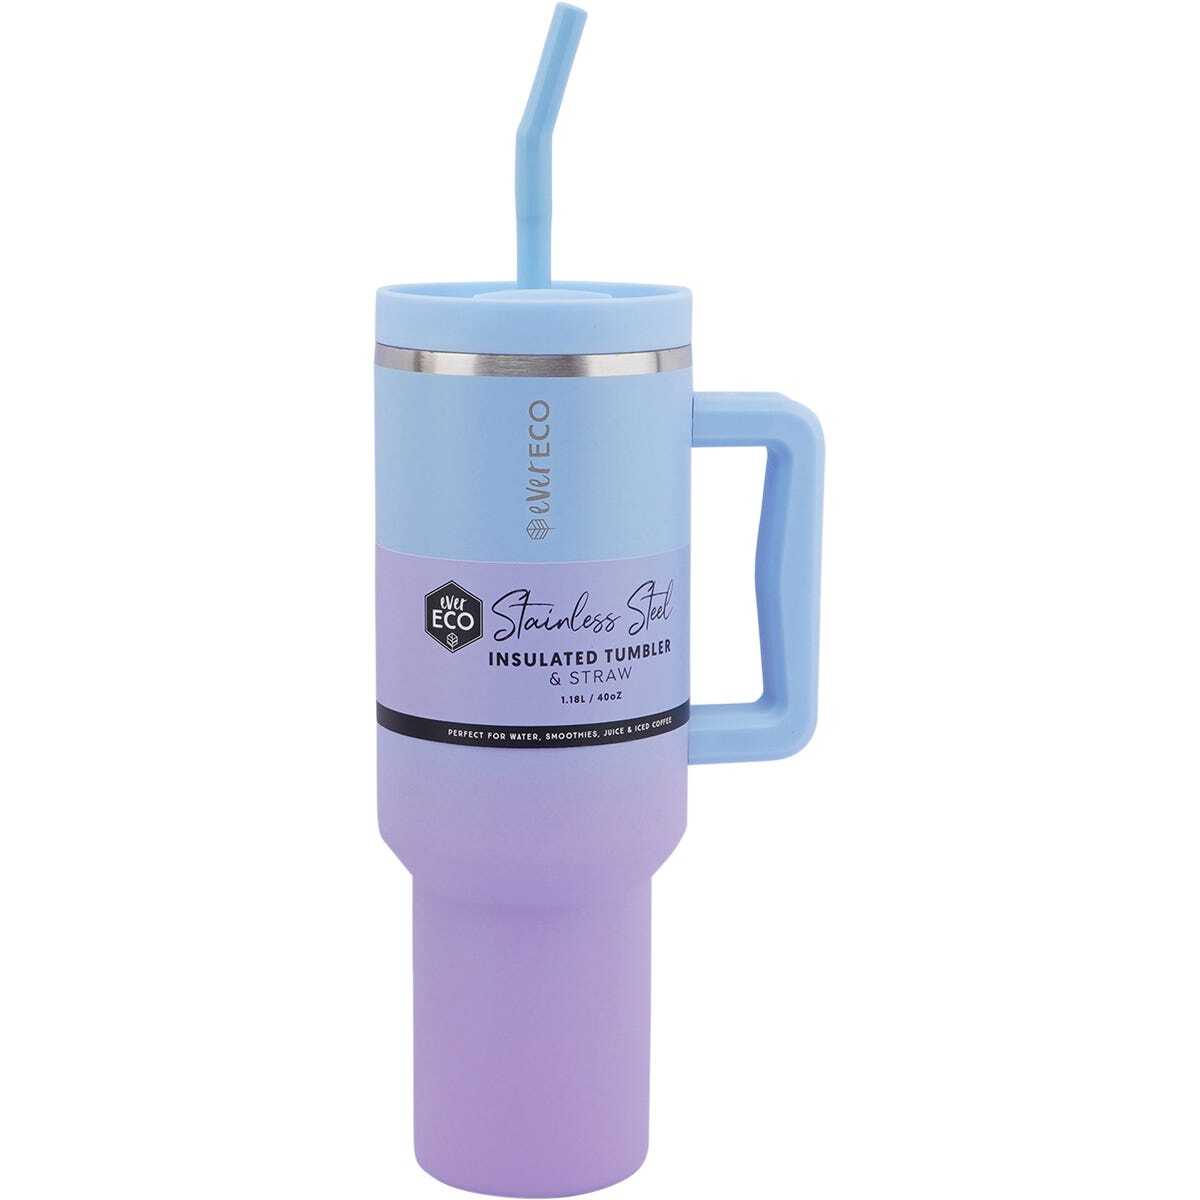 Insulated Stainless Steel Tumbler & Straw - Balance 1.18L